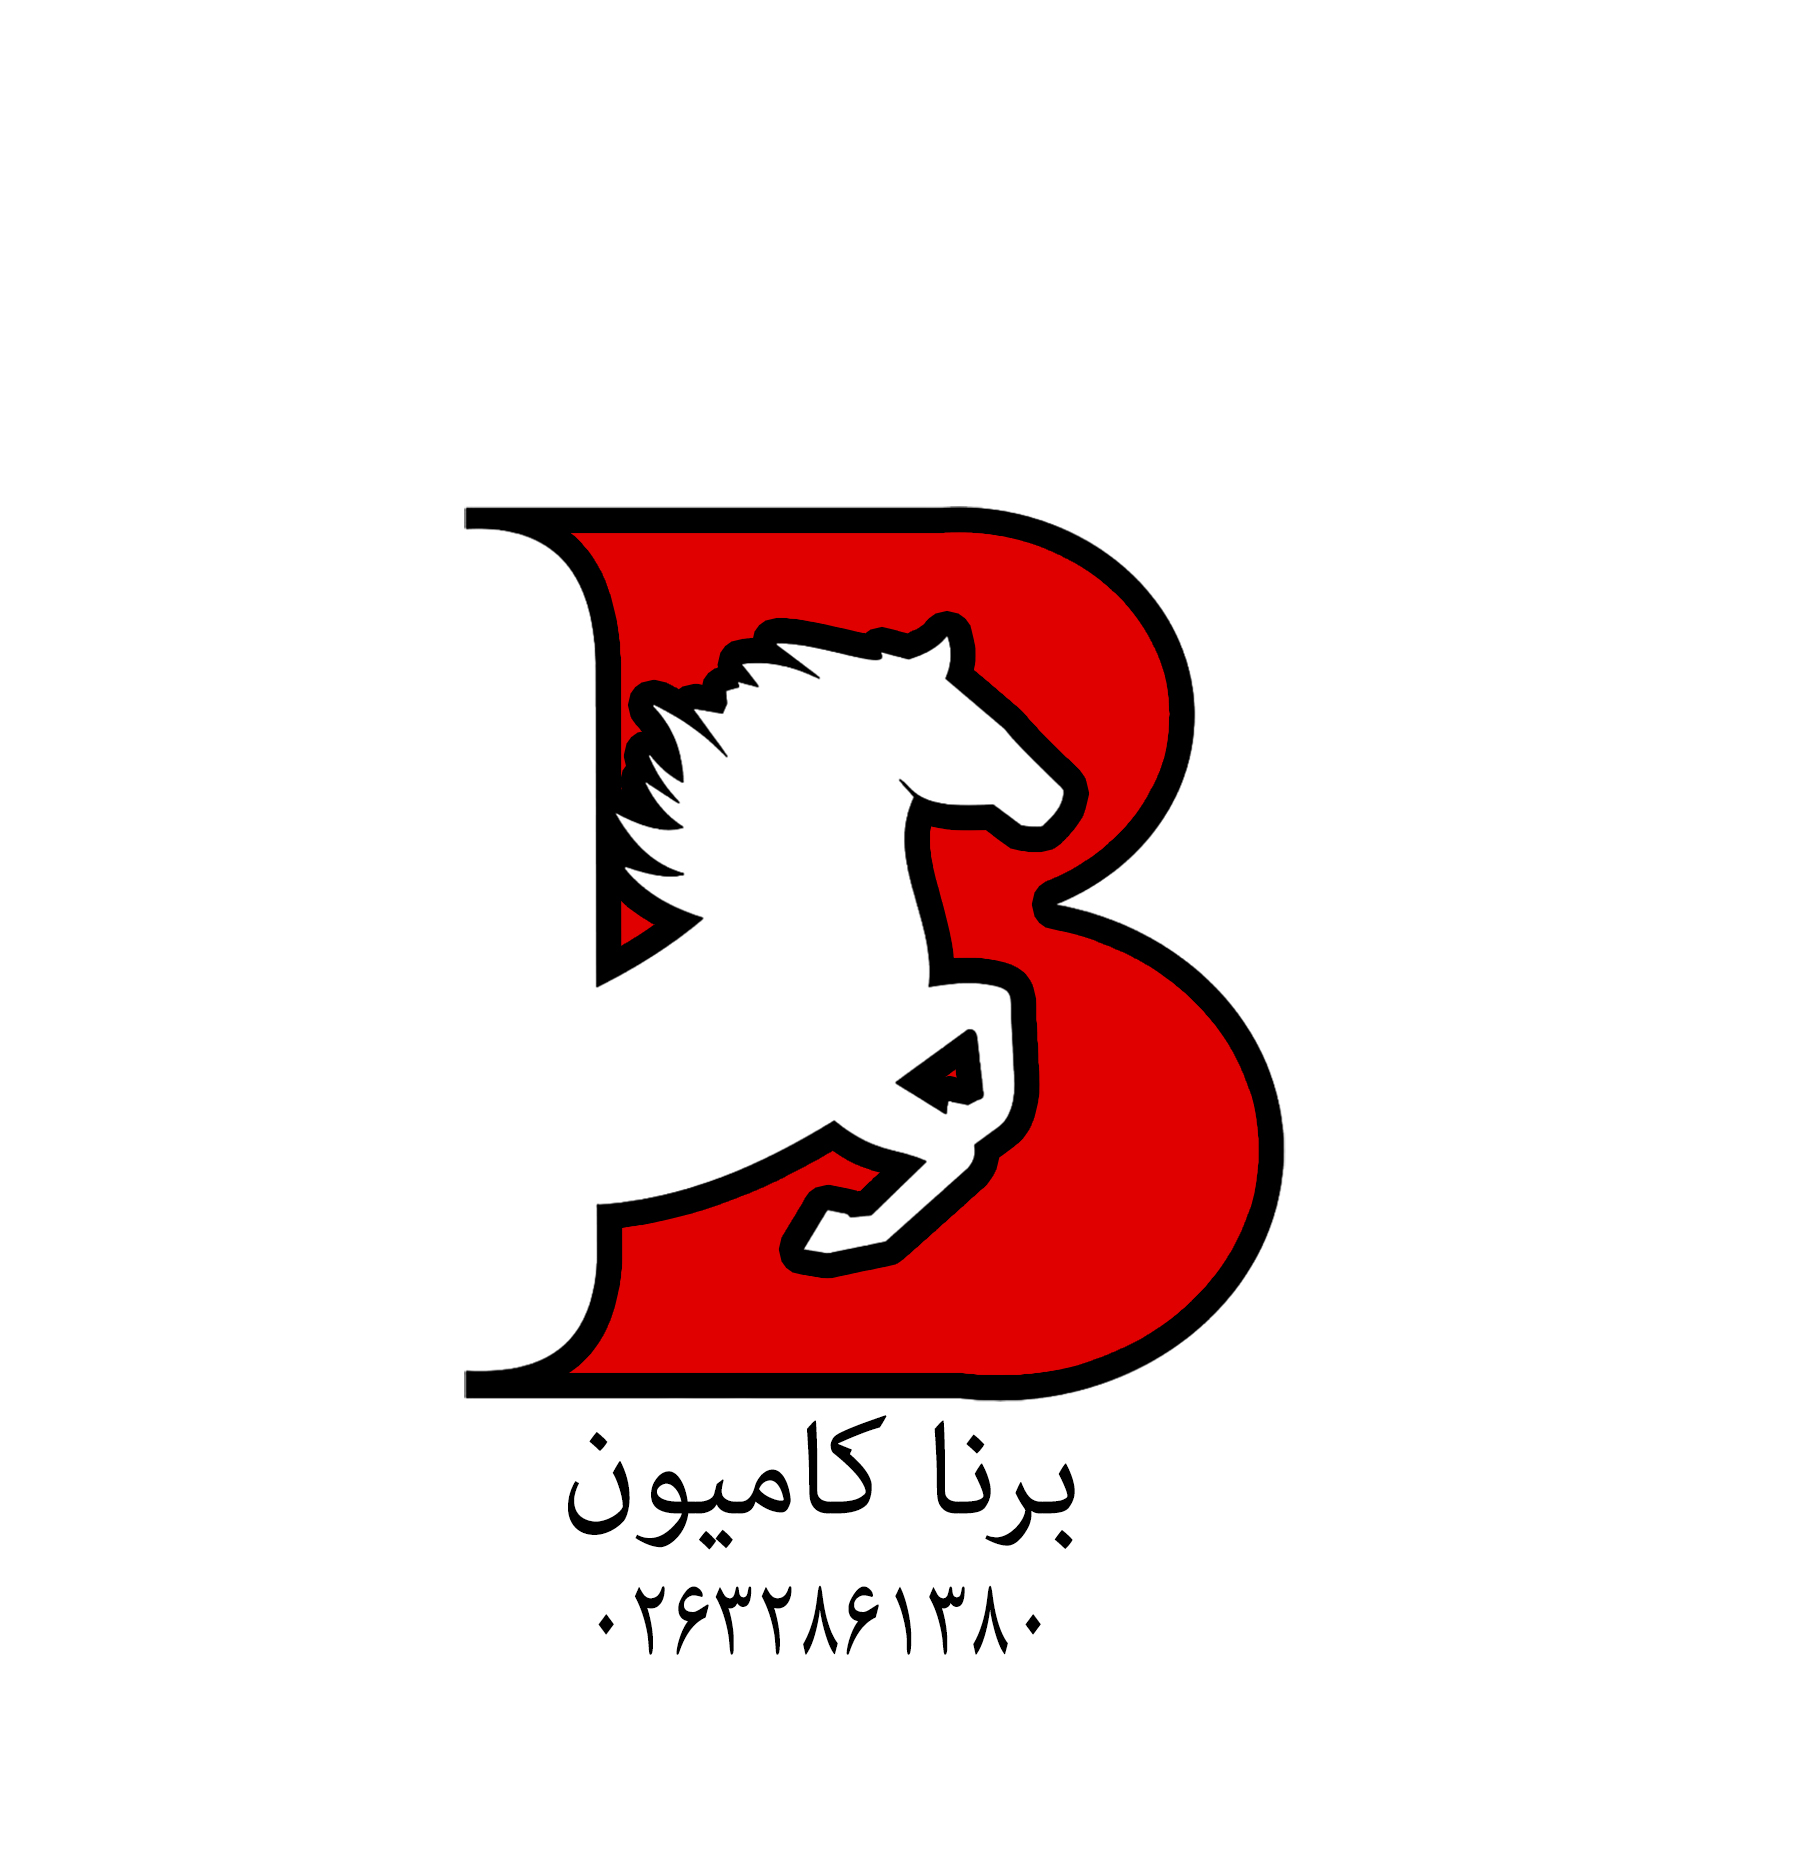 کاویان